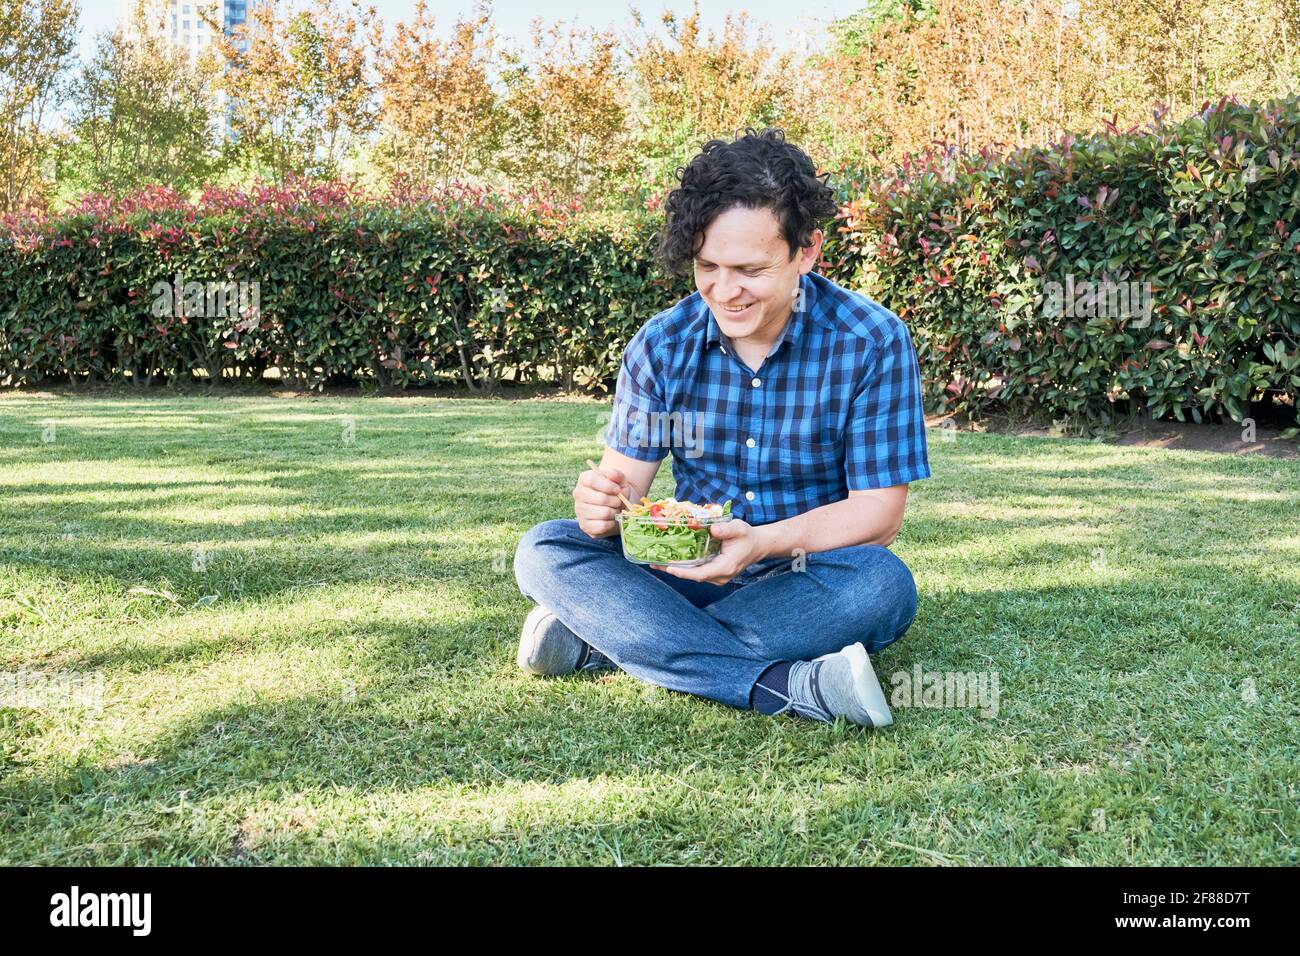 Smiling young man sitting on the grass eating a fresh salad. Healthy living and eating concepts. Stock Photo